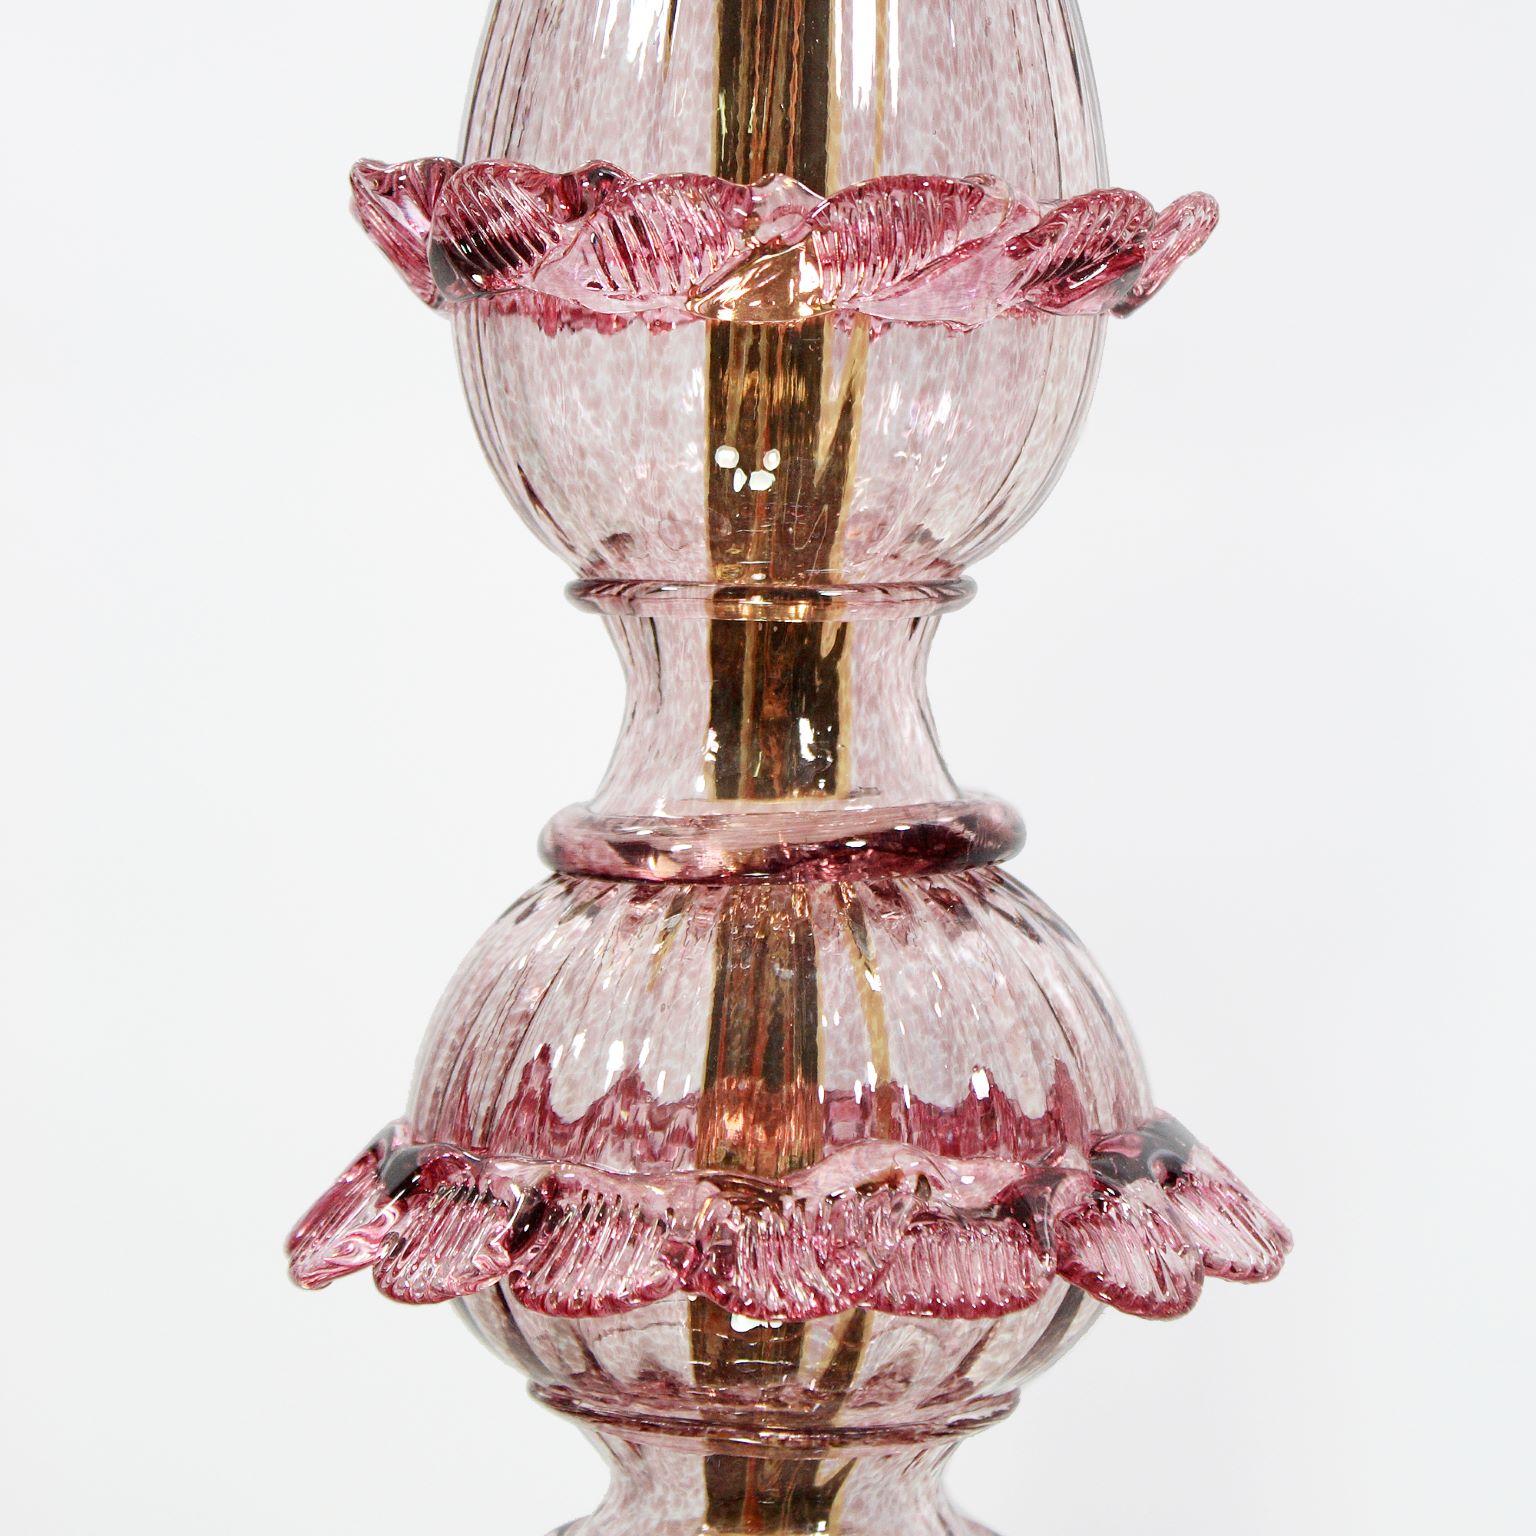 Italian Artistic Floor Lamp 5 Arms Amethyst Murano Glass, Pink Details by Multiforme For Sale